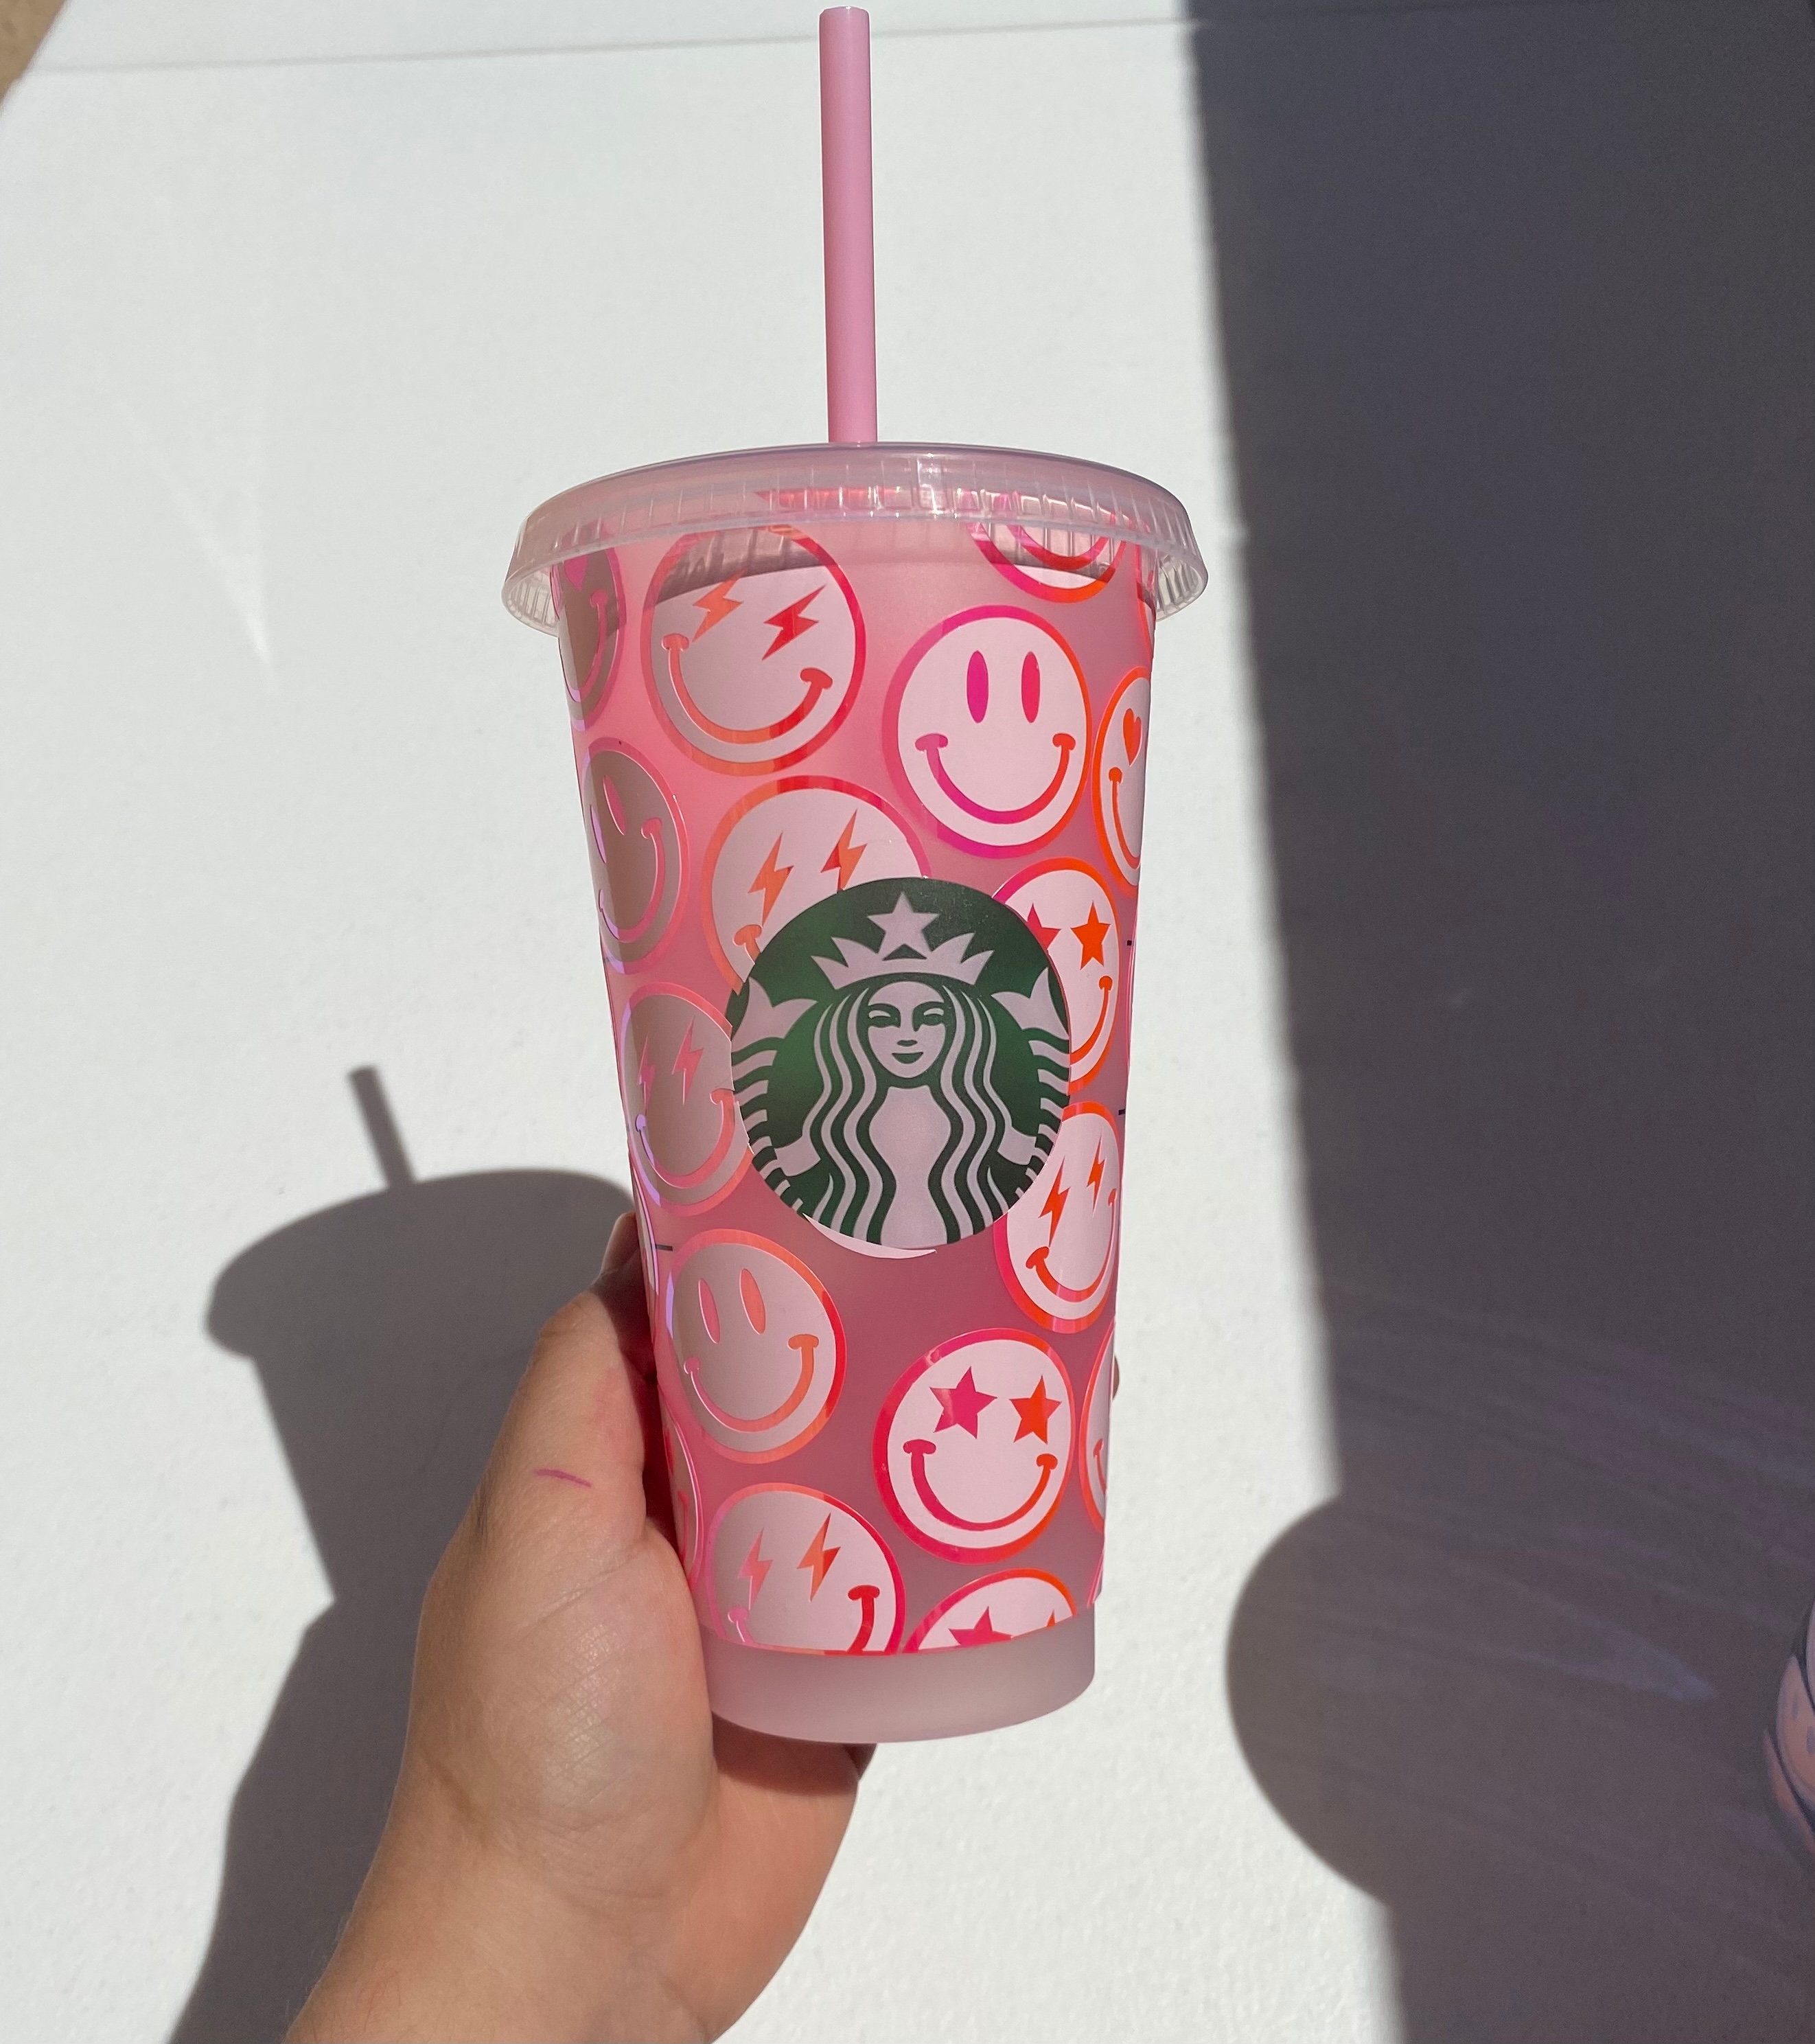 Preppy Pink and Blue Smile Cup